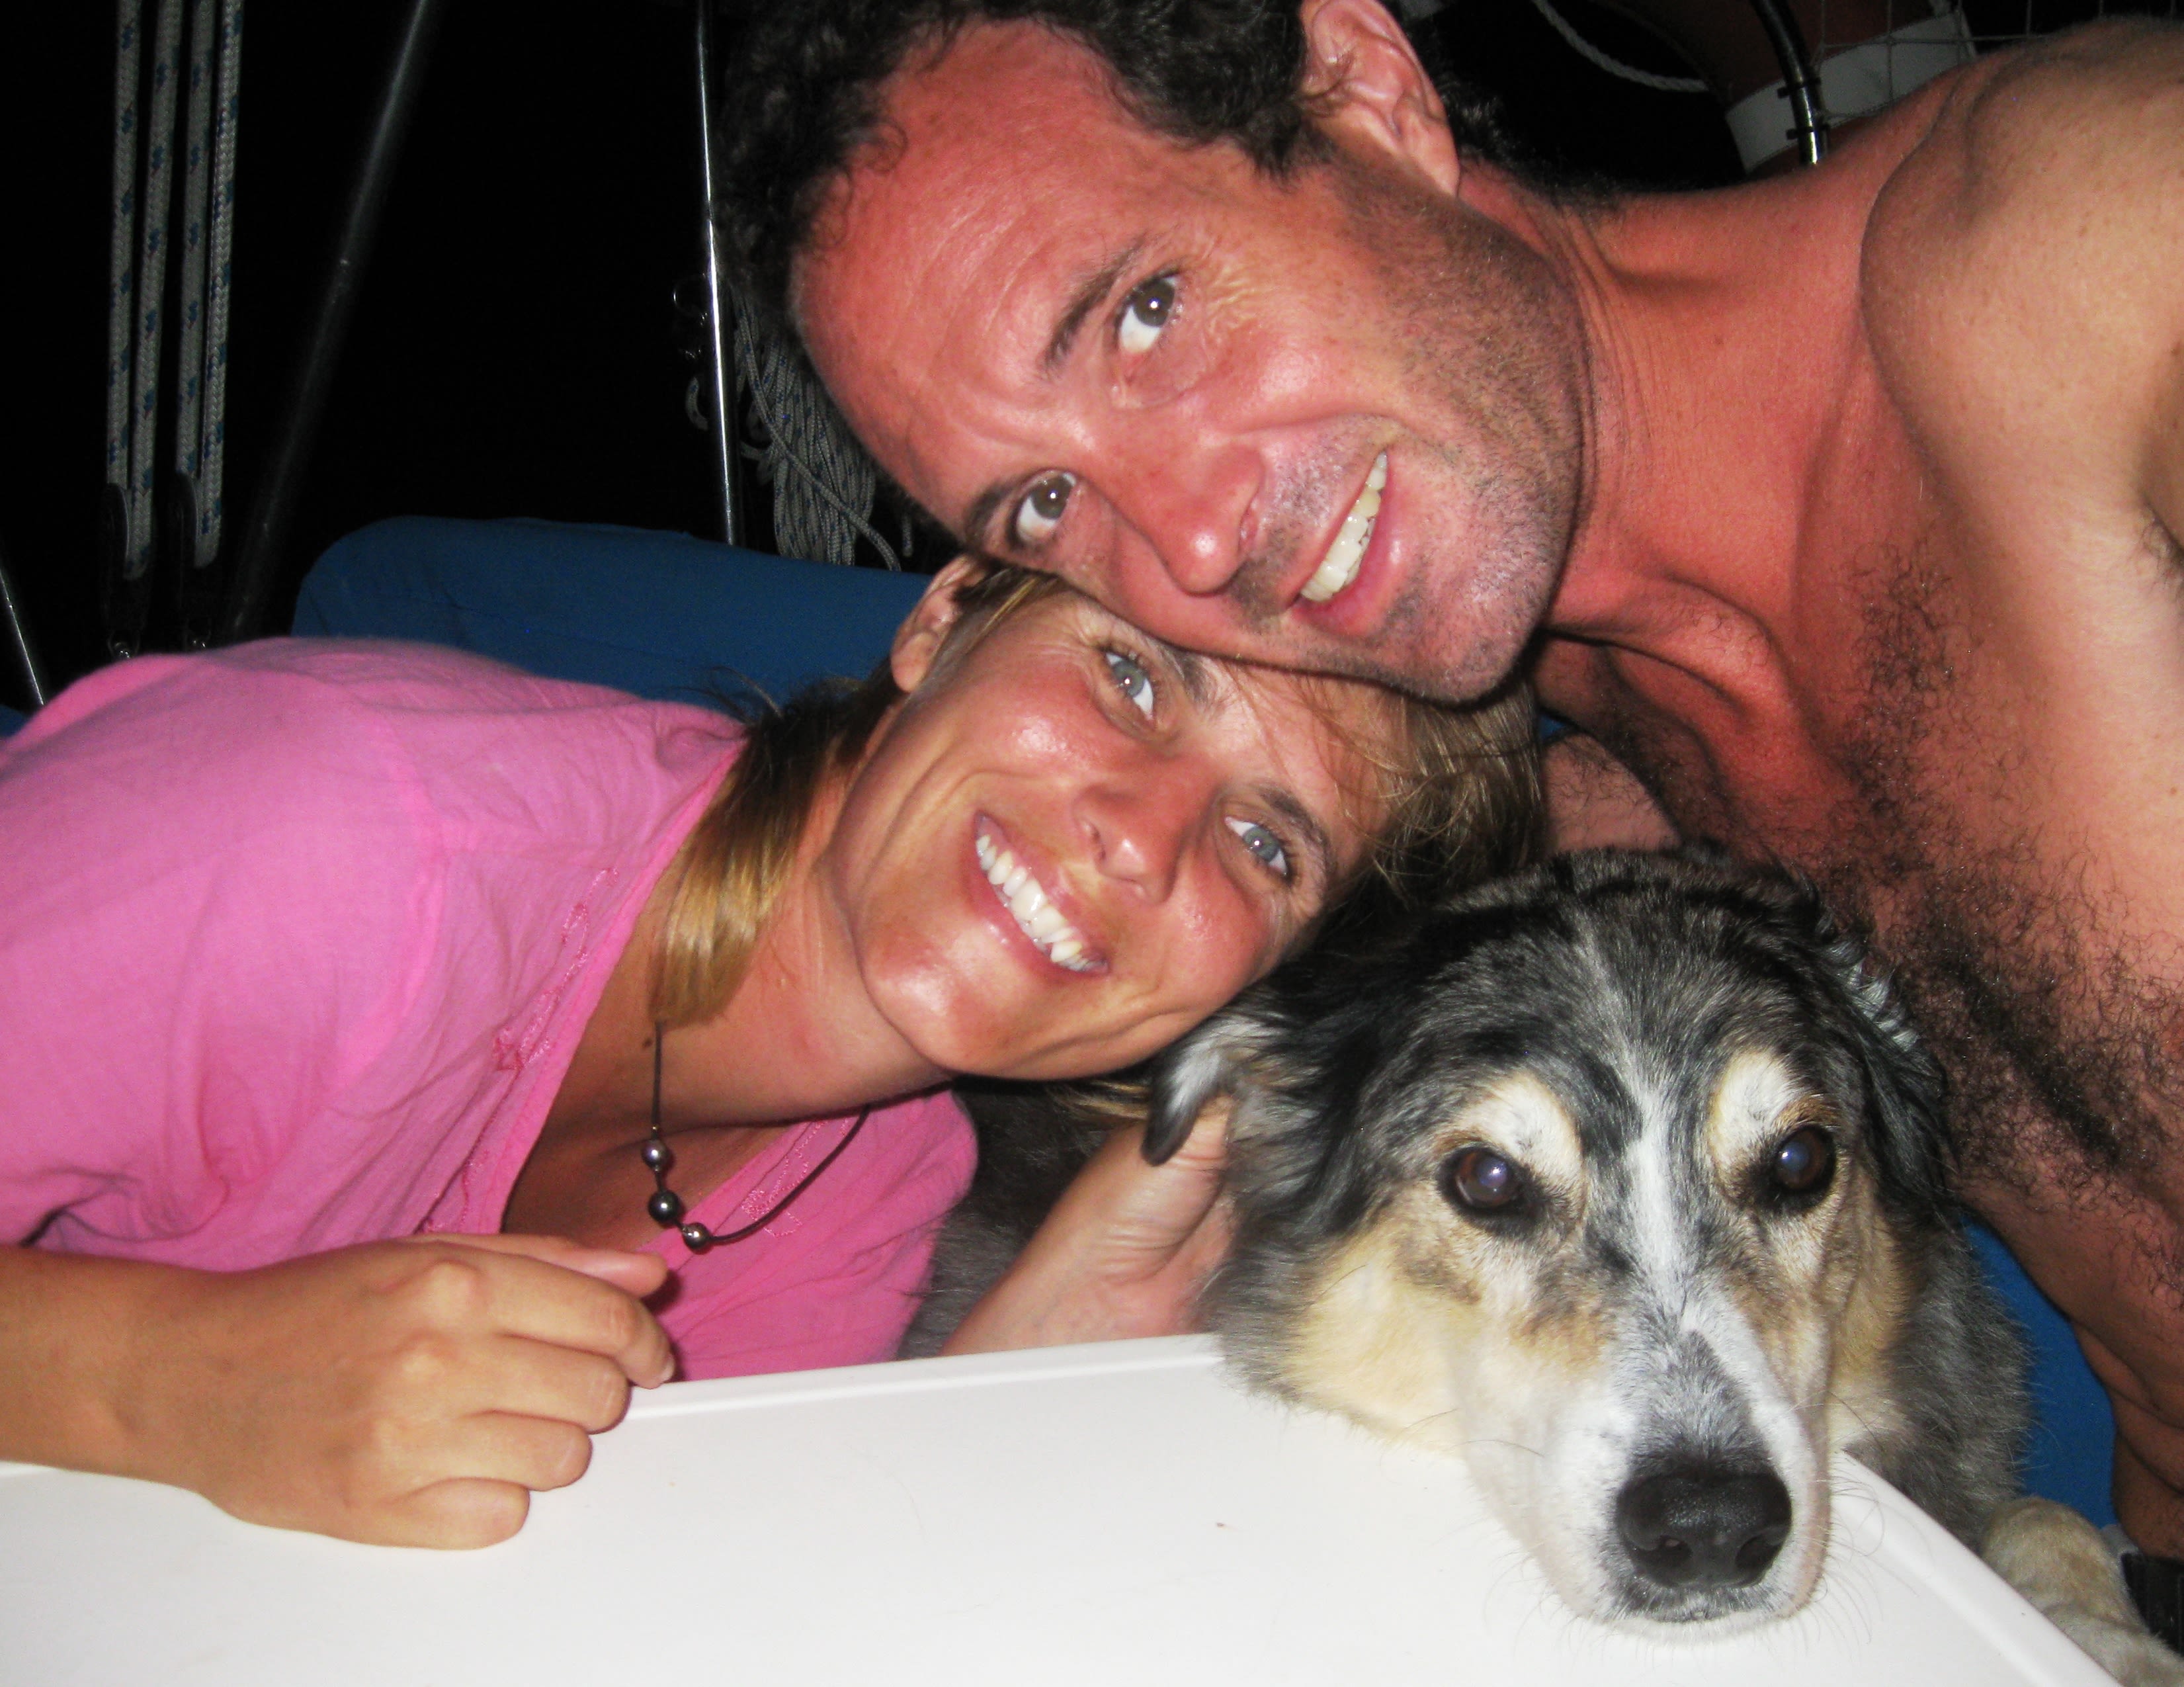 Here's Liesbet, Mark and one of Mark's dogs. Liesbet got on well with the dogs right away.